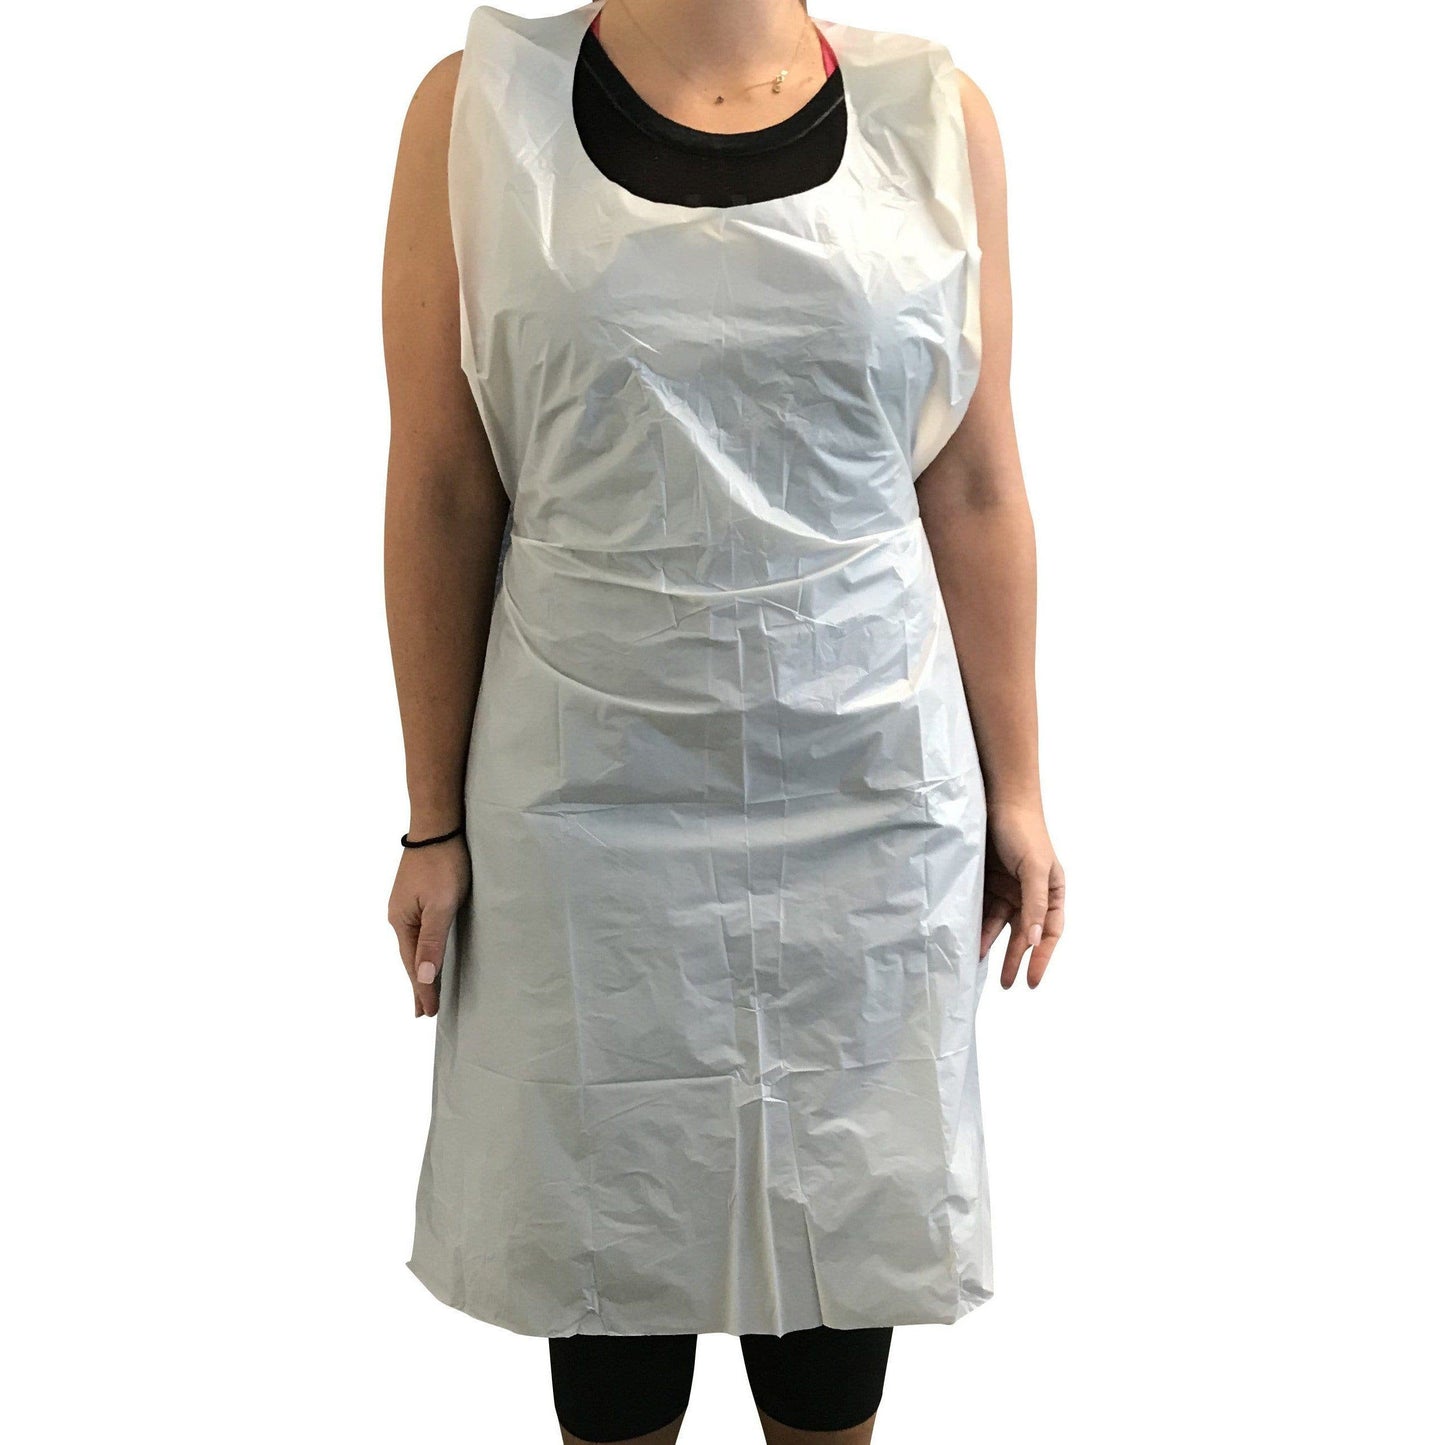 Poly Disposable Aprons | 100 pack | KingSeal HAIR COLORING ACCESSORIES KINGSEAL 